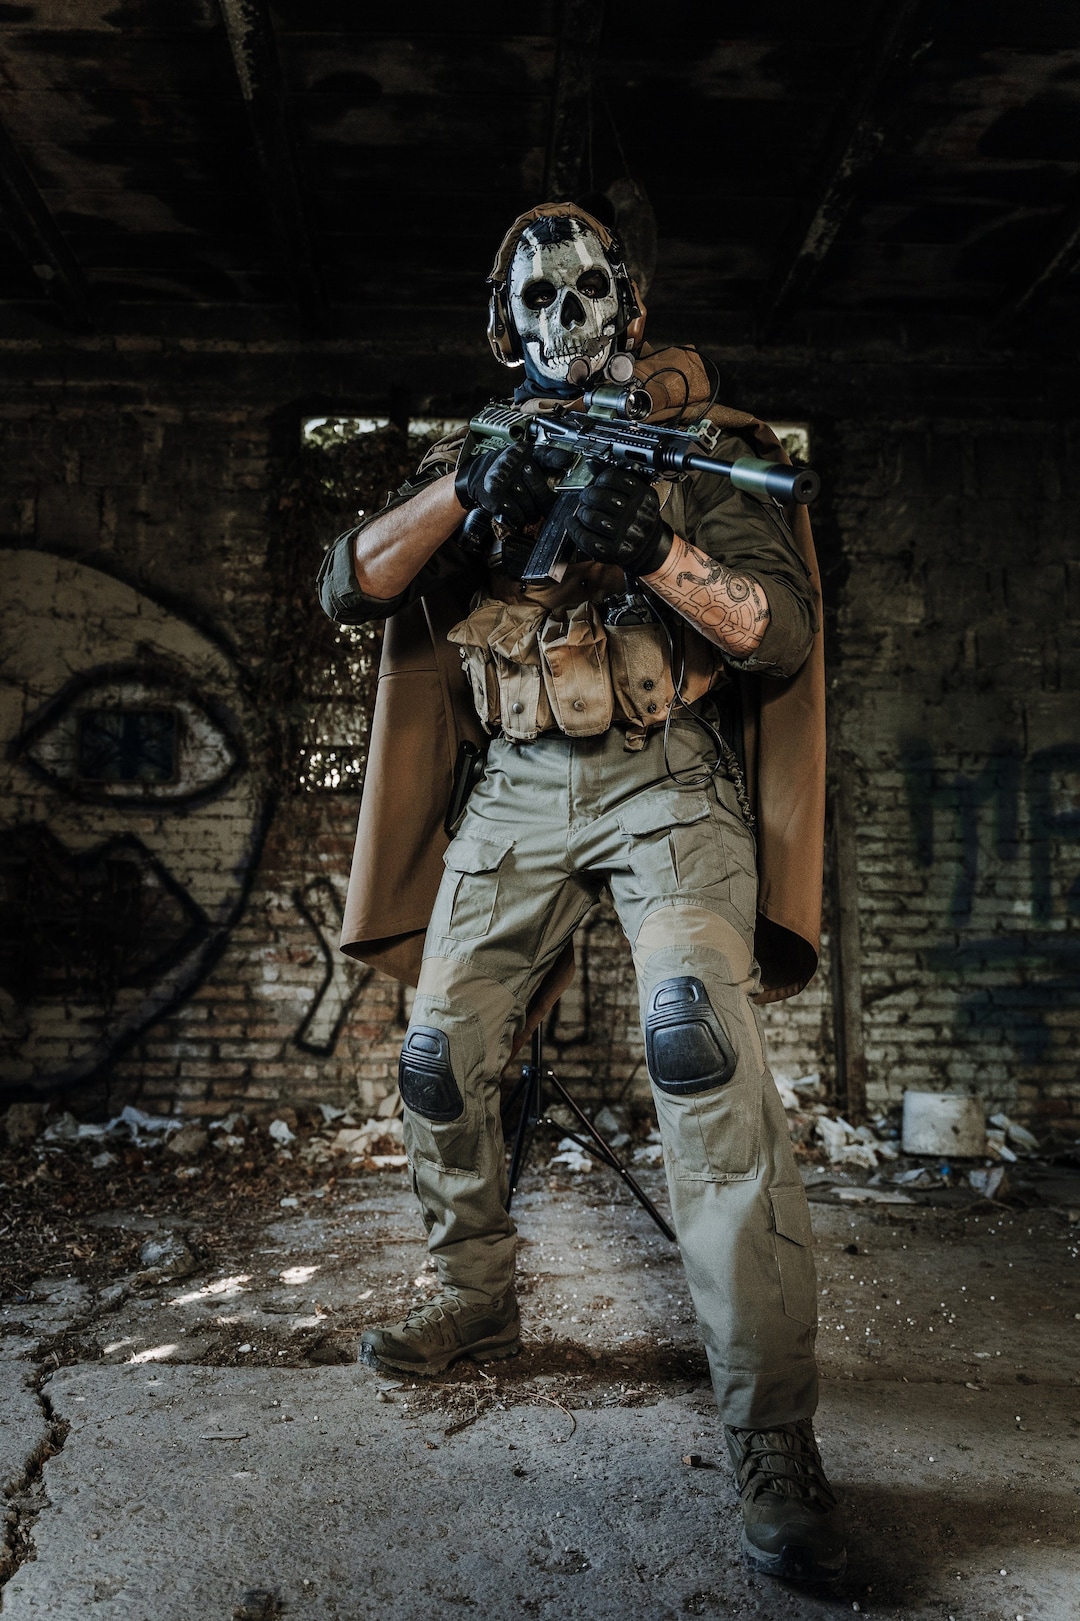 GHOST CALL OF DUTY MODERN WARFARE COSPLAY MASK 3D PRINTED WARZONE 2.0, ghost  call of duty 